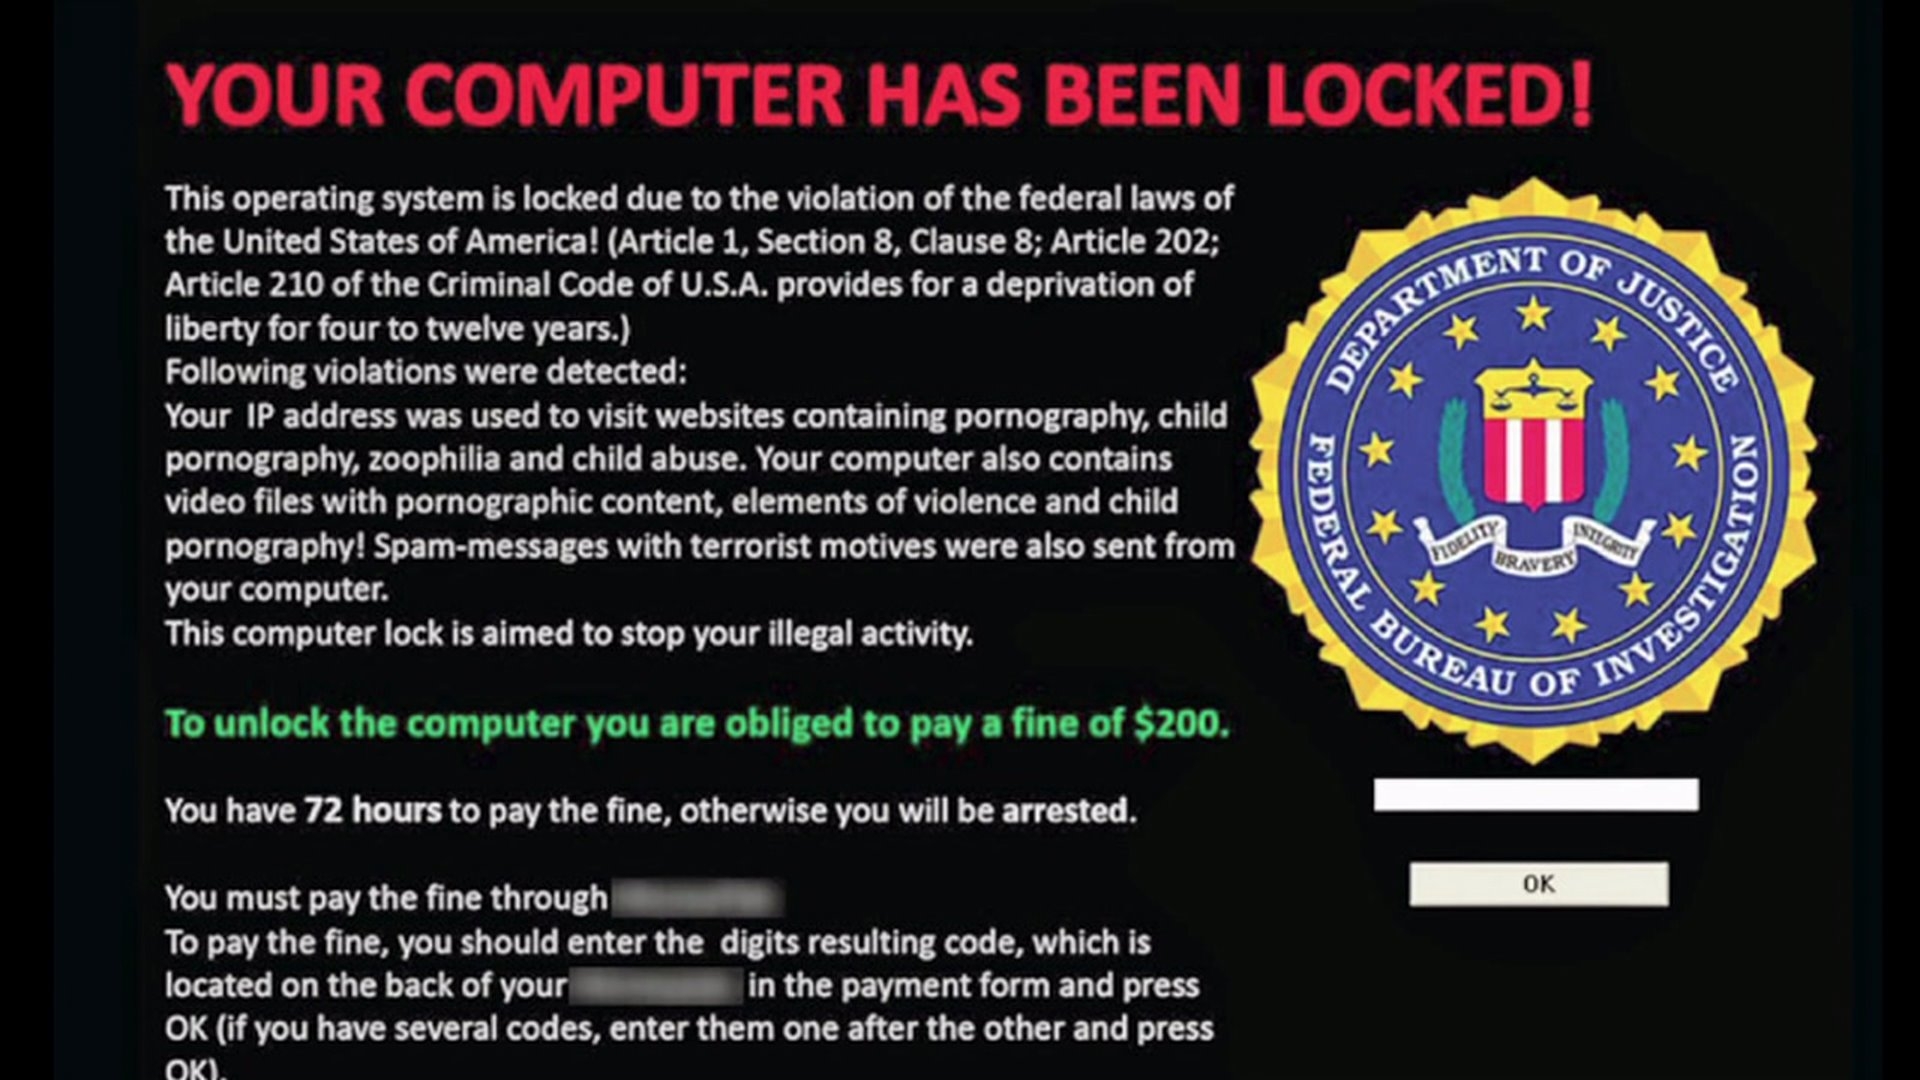 A scam alert requesting $200 to unlock your computer